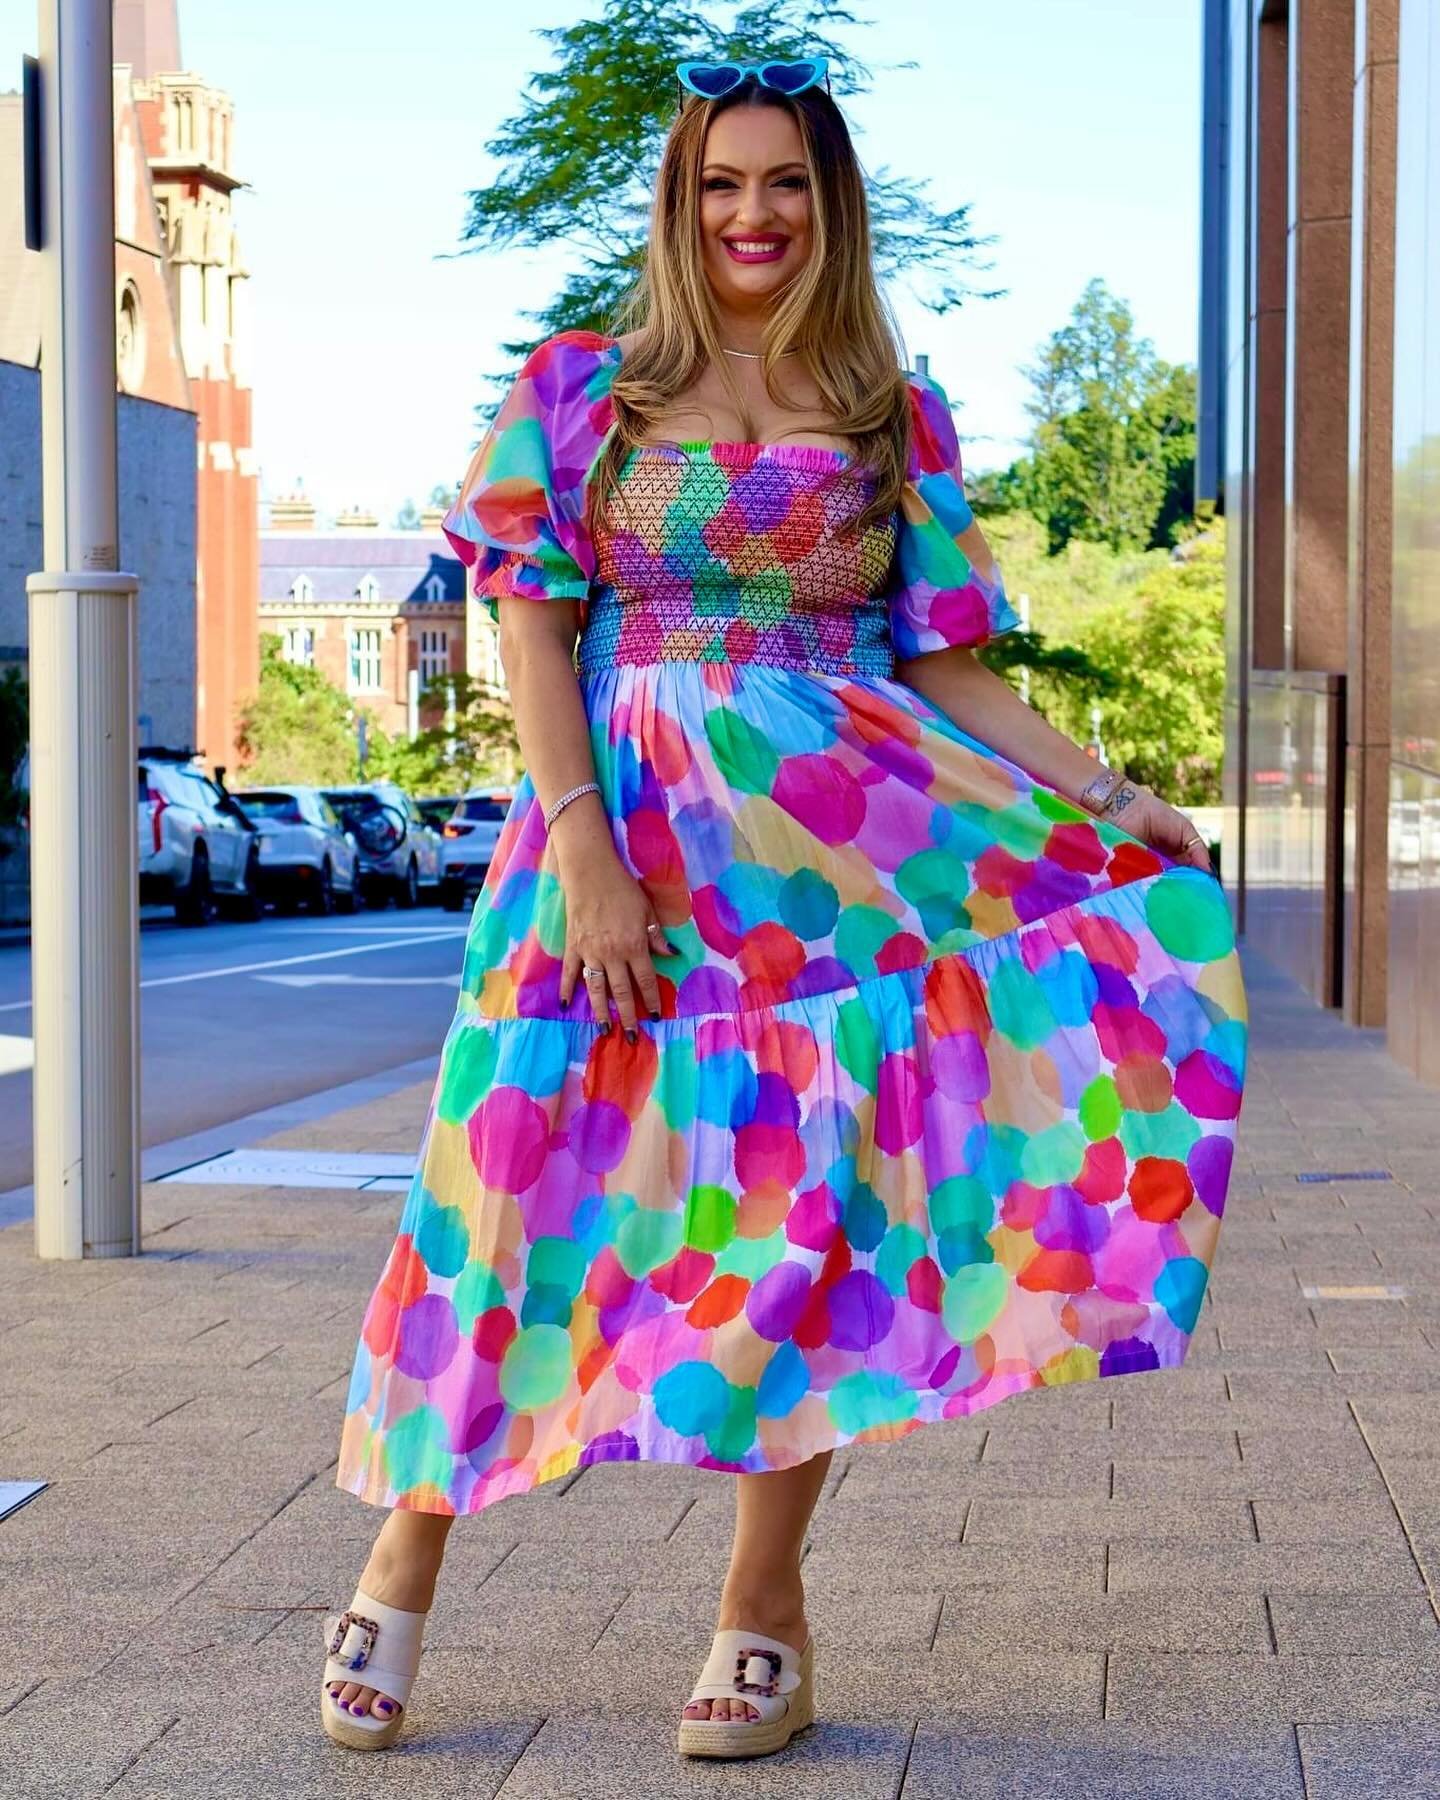 Shoutout to @km_art.life for this wonderful dress/piece of wearable art ! 🖼️ the minute I saw these bright colours I knew it was meant for me !! 🧡🩷🧡🩷🩵🩷🩵🩷

Congratulations @ragpopup for another successful day !!

#wearableart #fashionblogger 